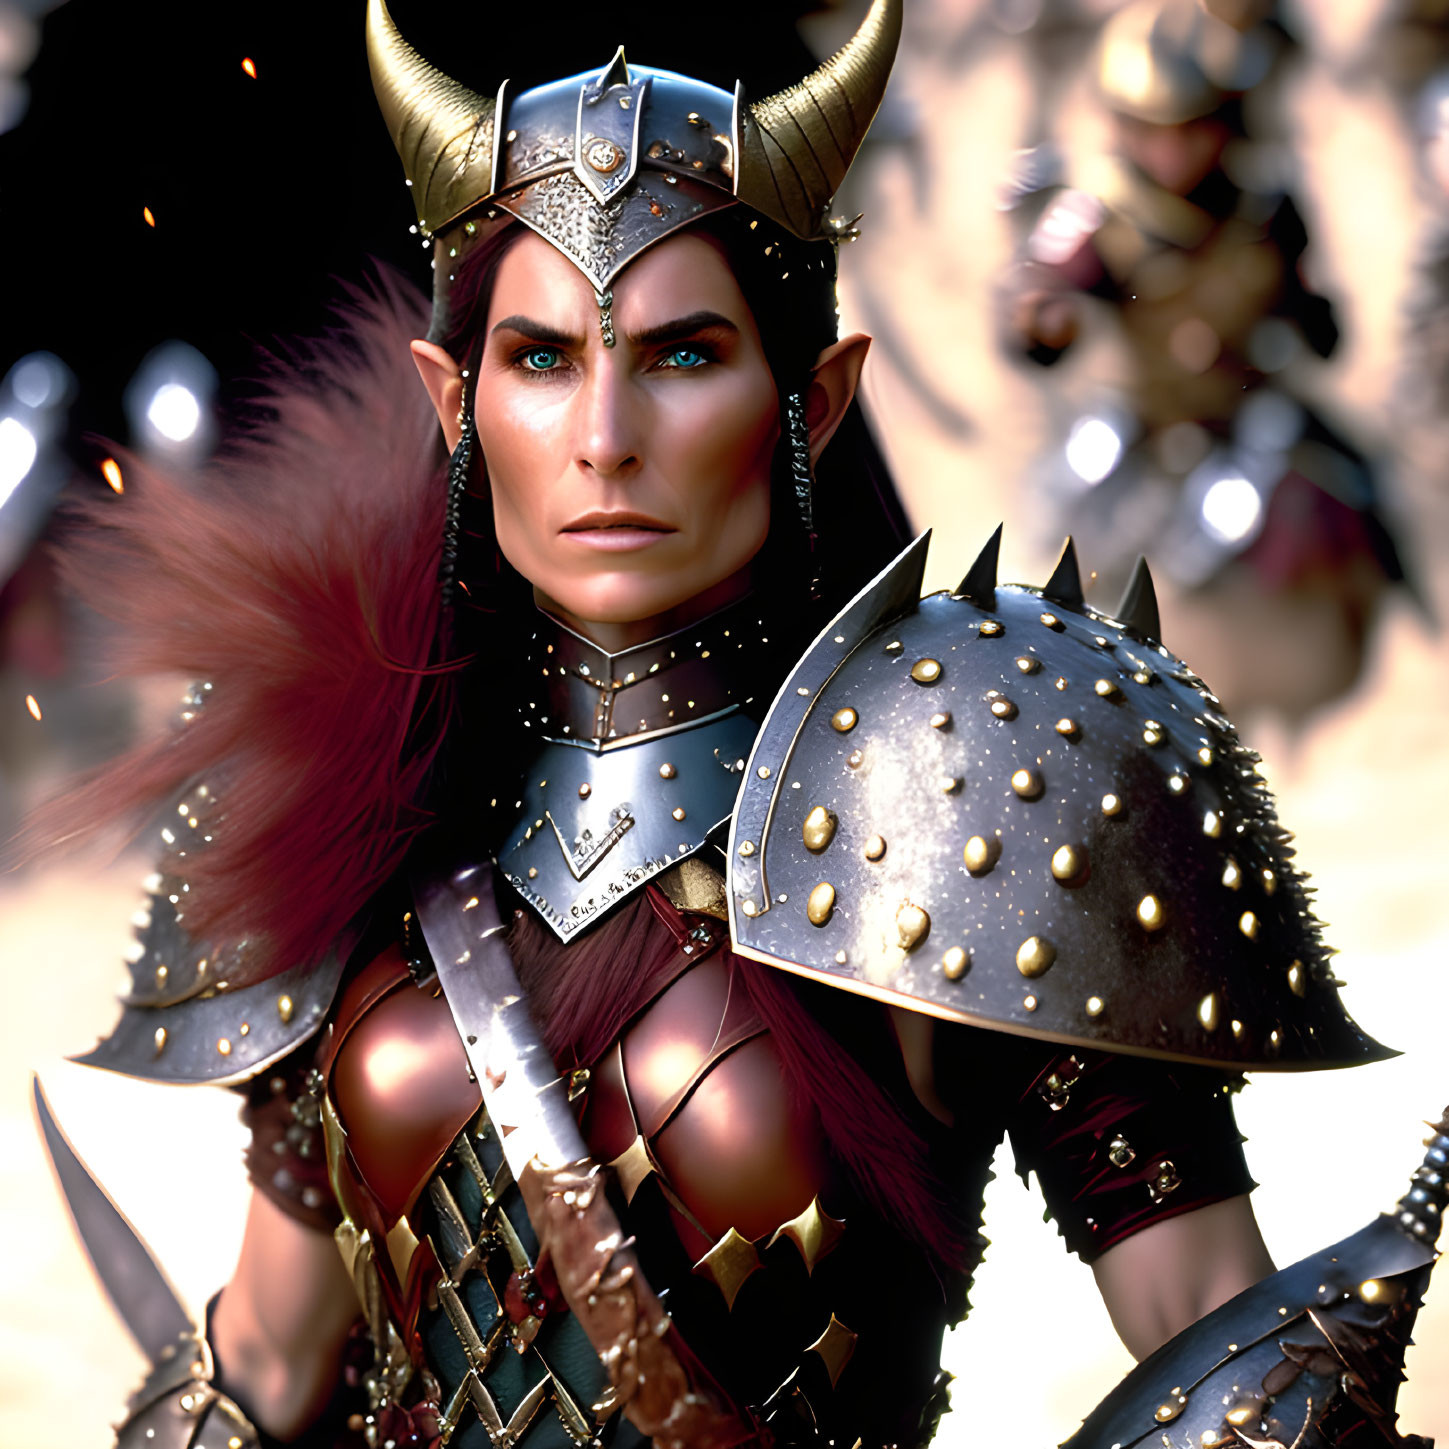 Elf warrior in horned helmet and armor, ready for battle with troops in background